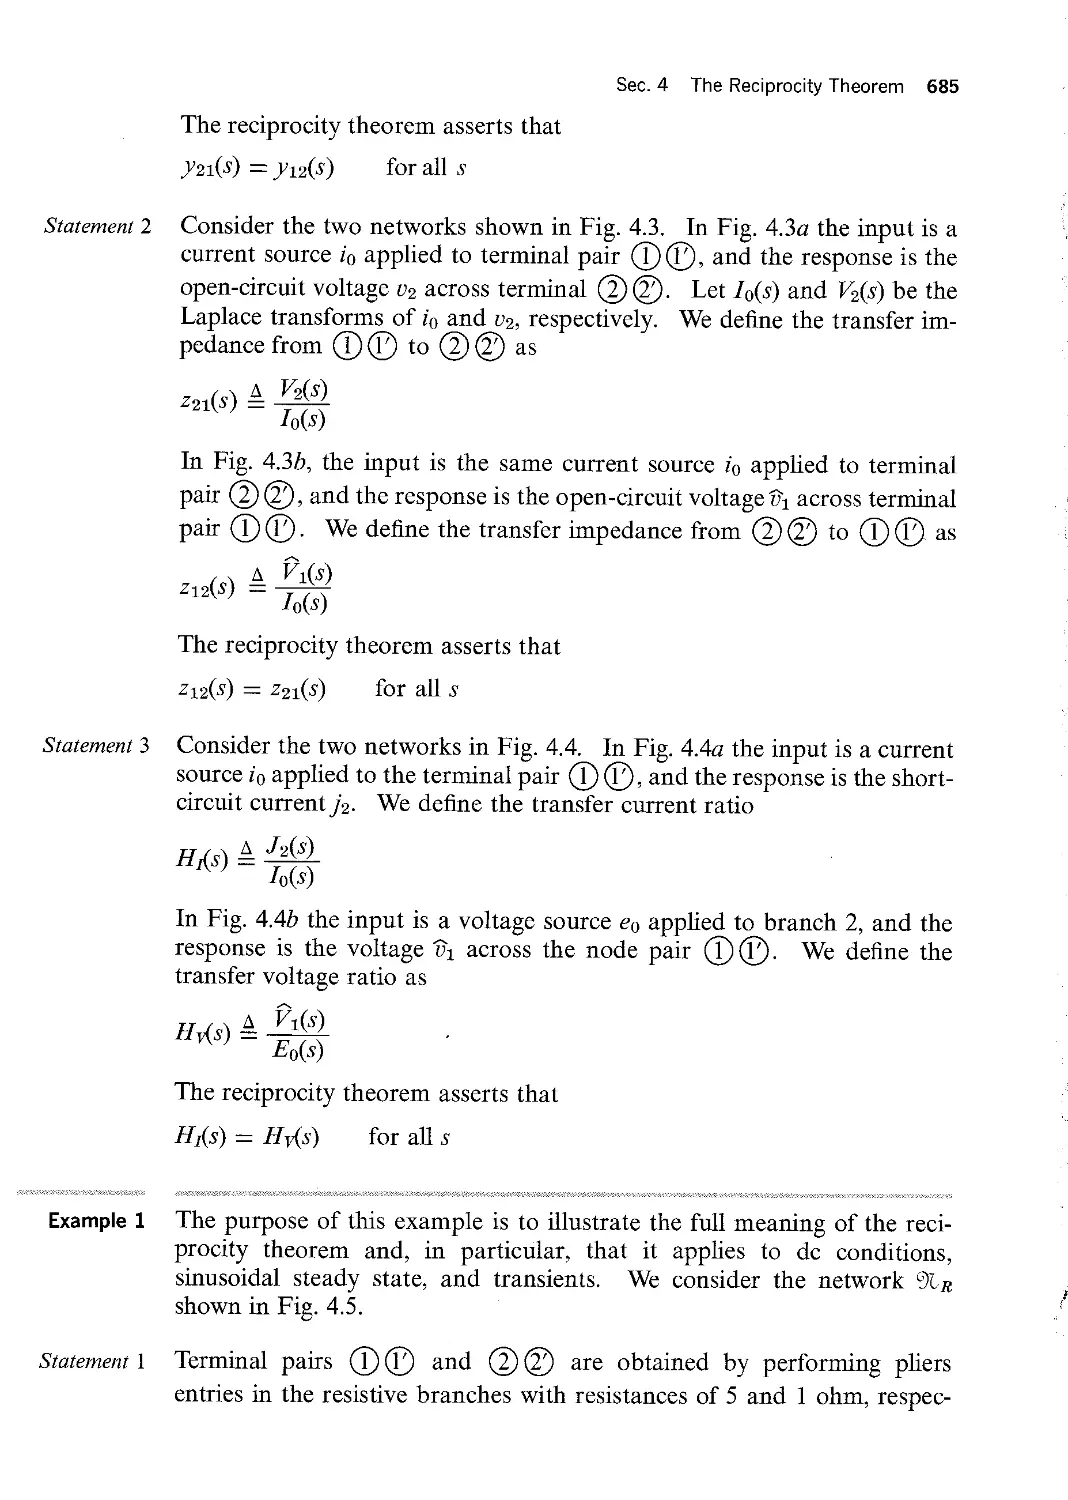 2.2 - Application of the Phasor Method to Differential Equations